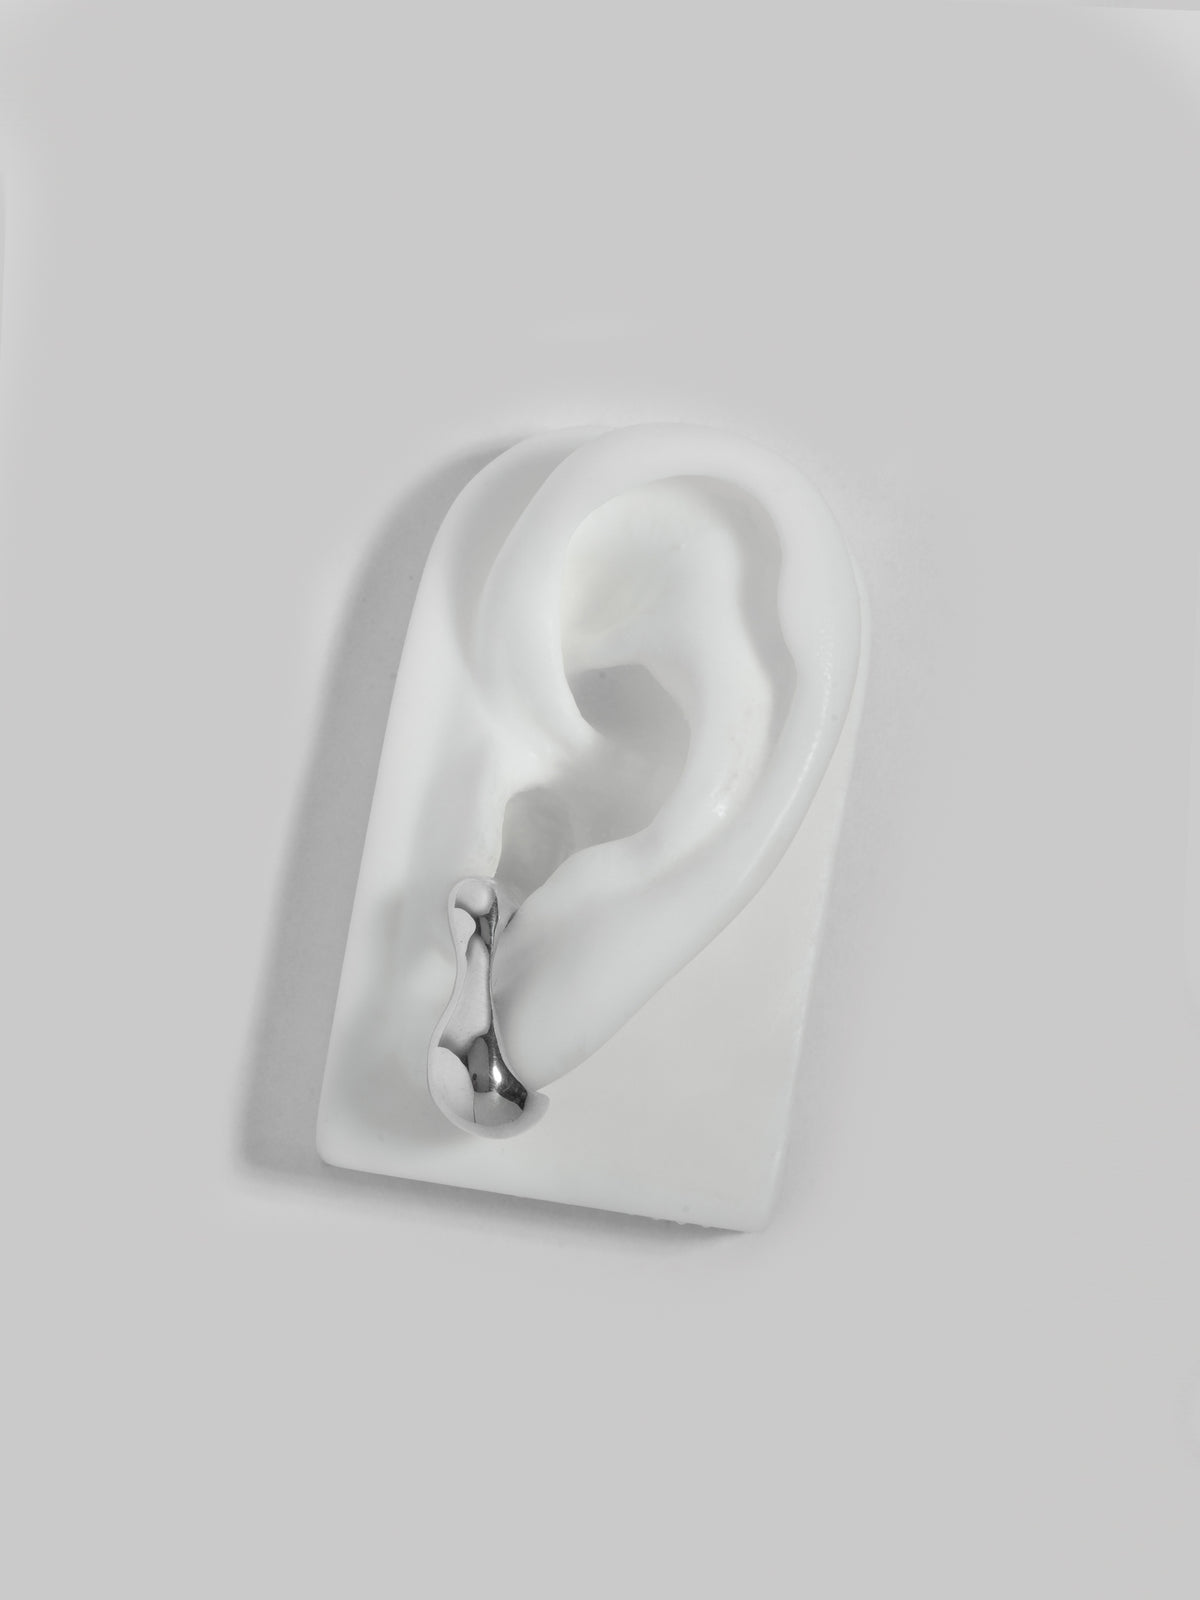 Product image of FARIS REST Stud in sterling silver, shown on white silicon ear display (front view)